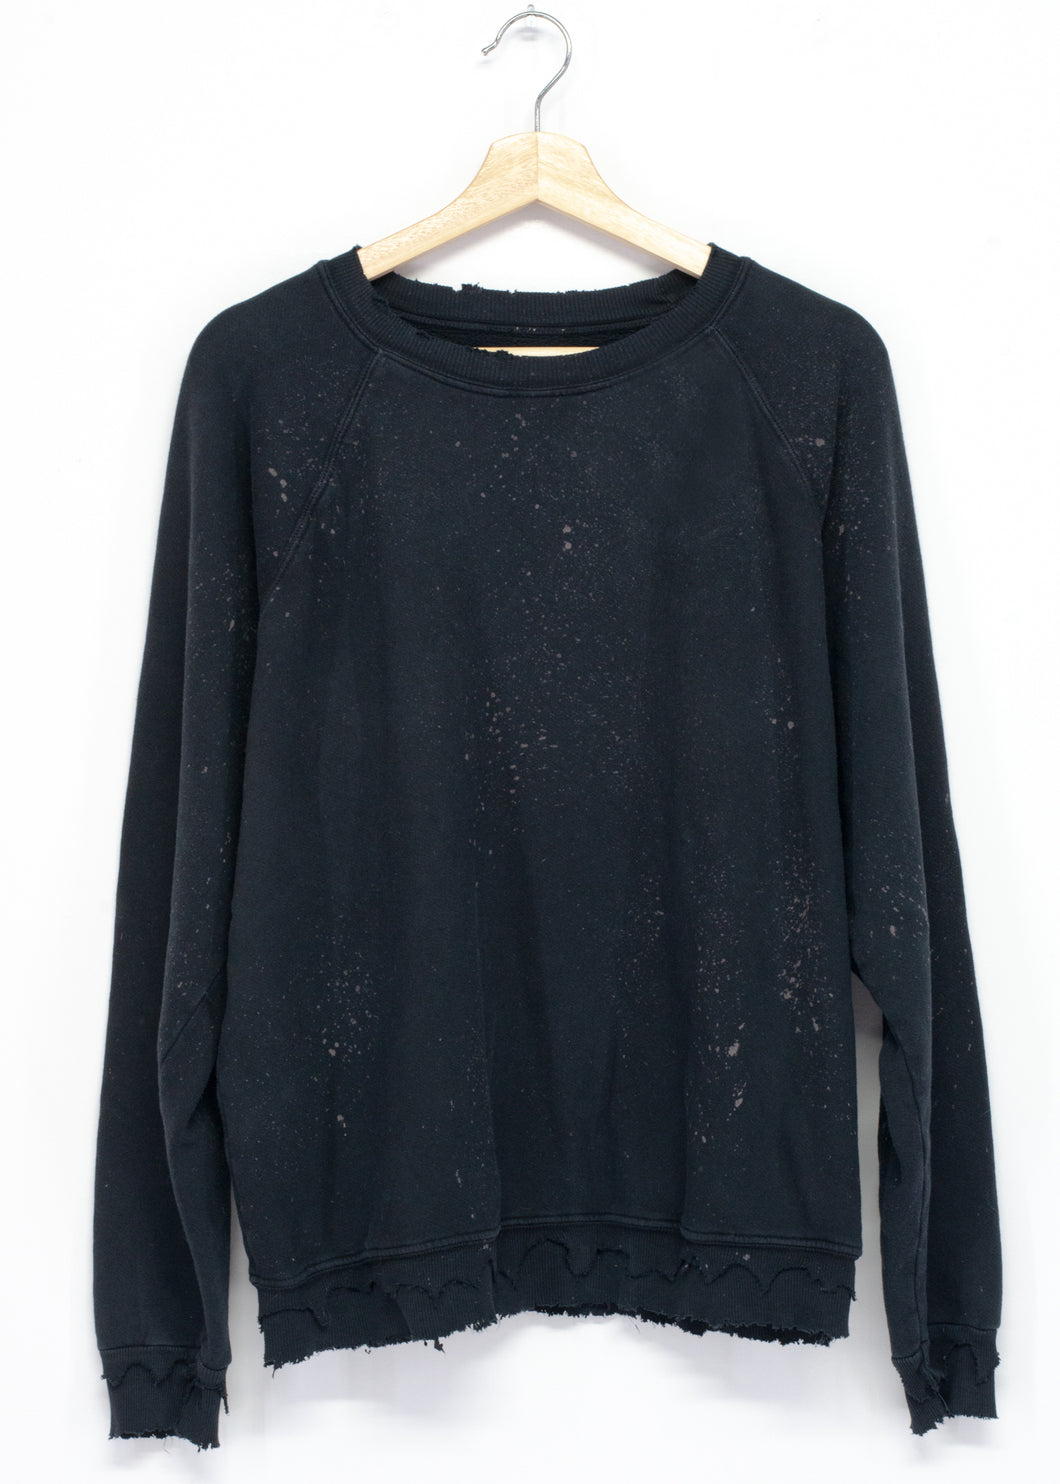 MILKY WAY WASHED BLACK WITH CUSTOM HAND EMBROIDERY